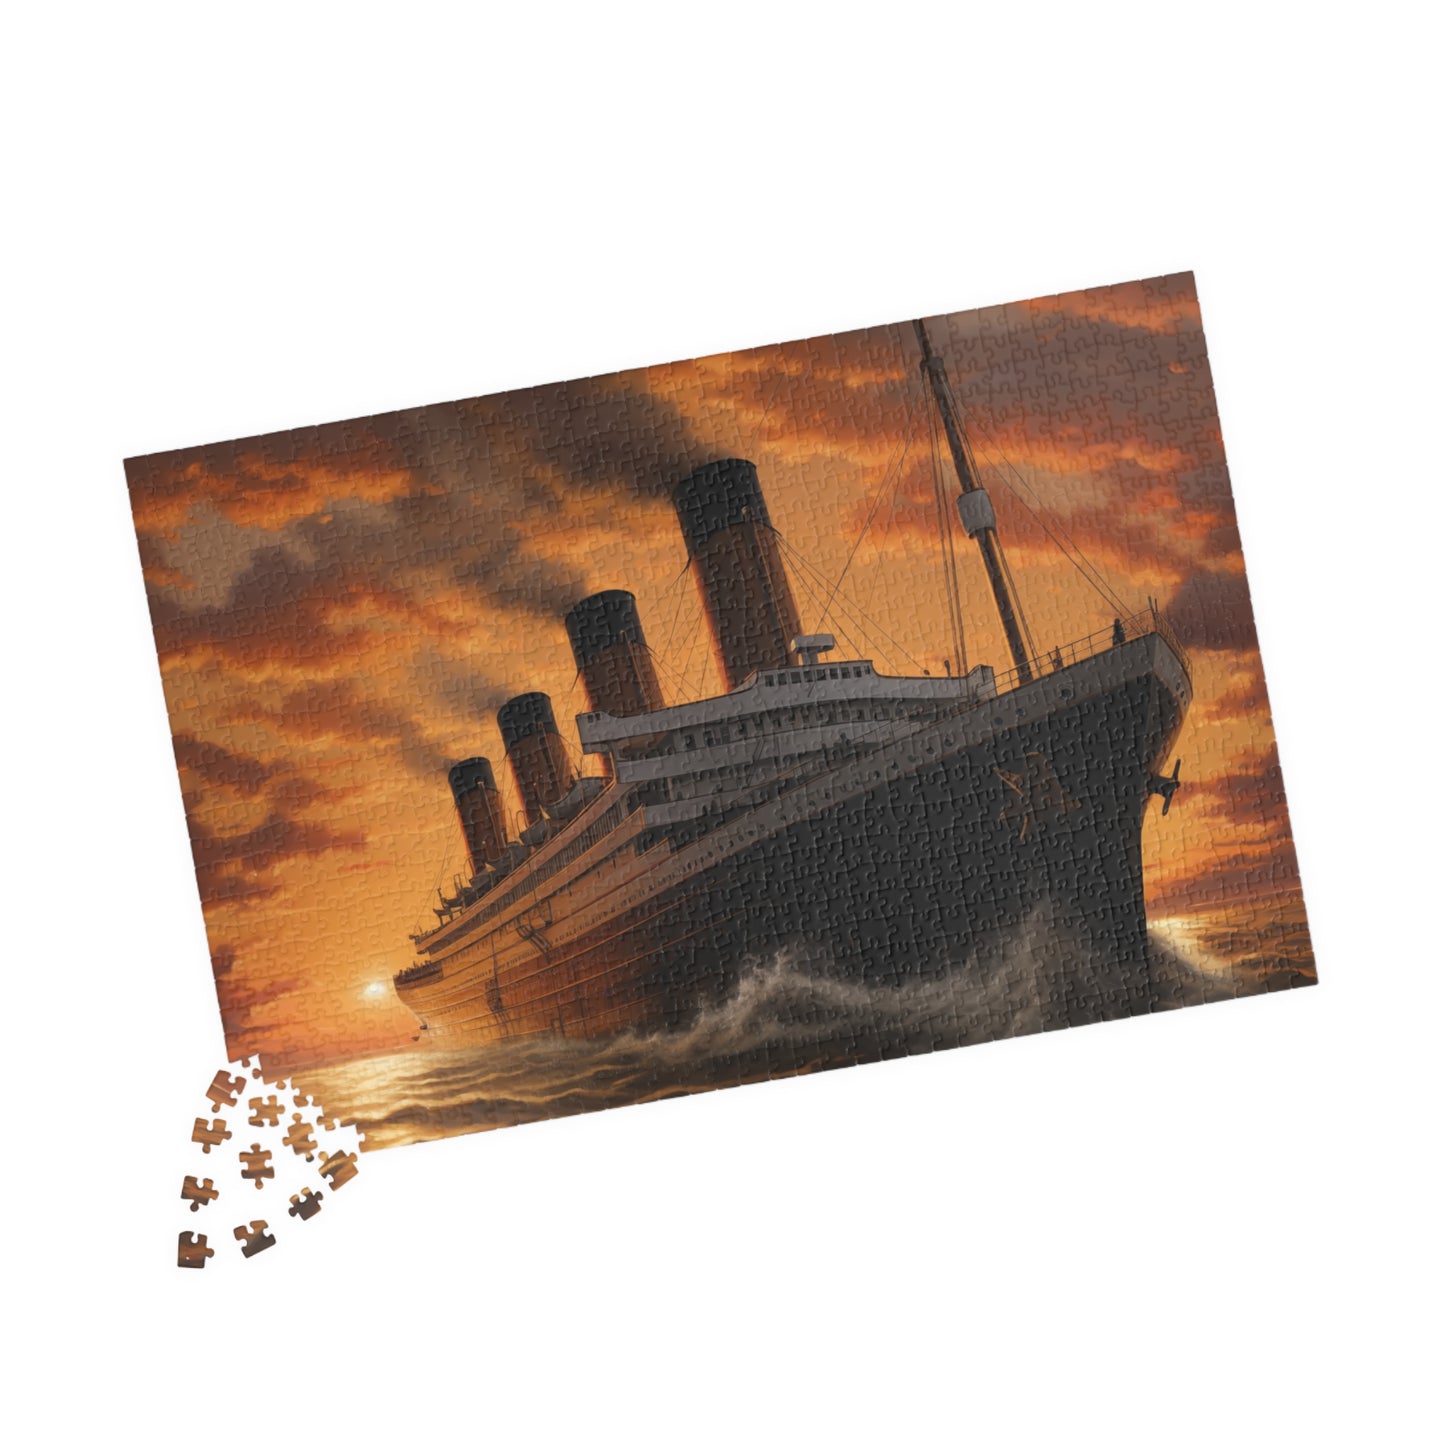 Titanic Sunrise Puzzle (110, 252, 500, 1014-piece) Queen Mary Large Ship Beautiful Scenery Ocean Sea Cruise Maiden Voyage Jigsaw Jig Saw